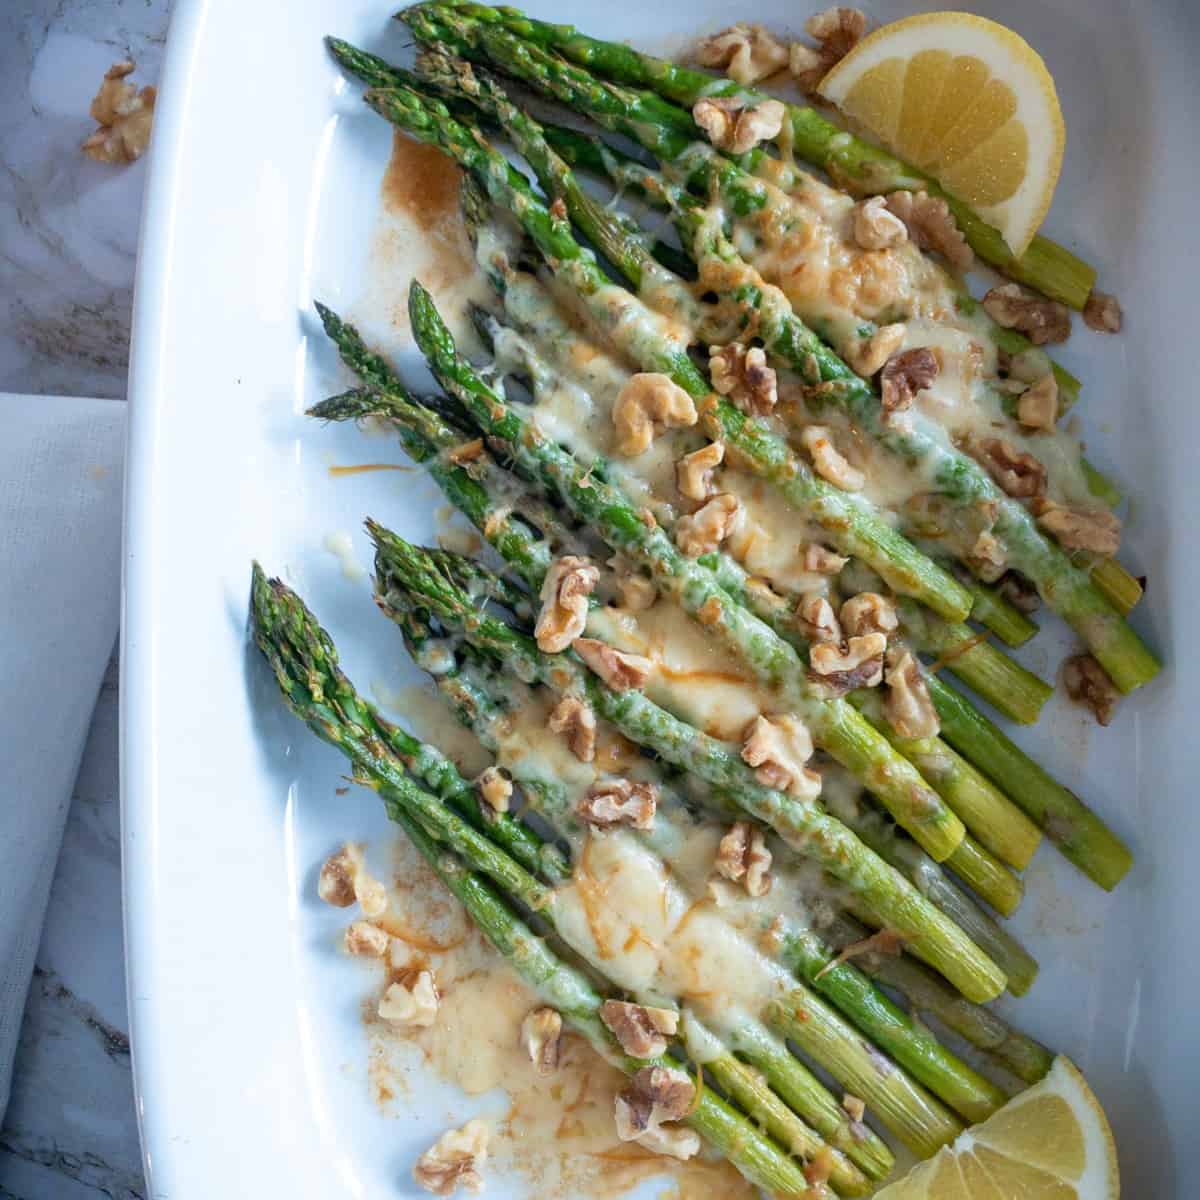 Spears of asparagus covered in melted gouda and walnuts 